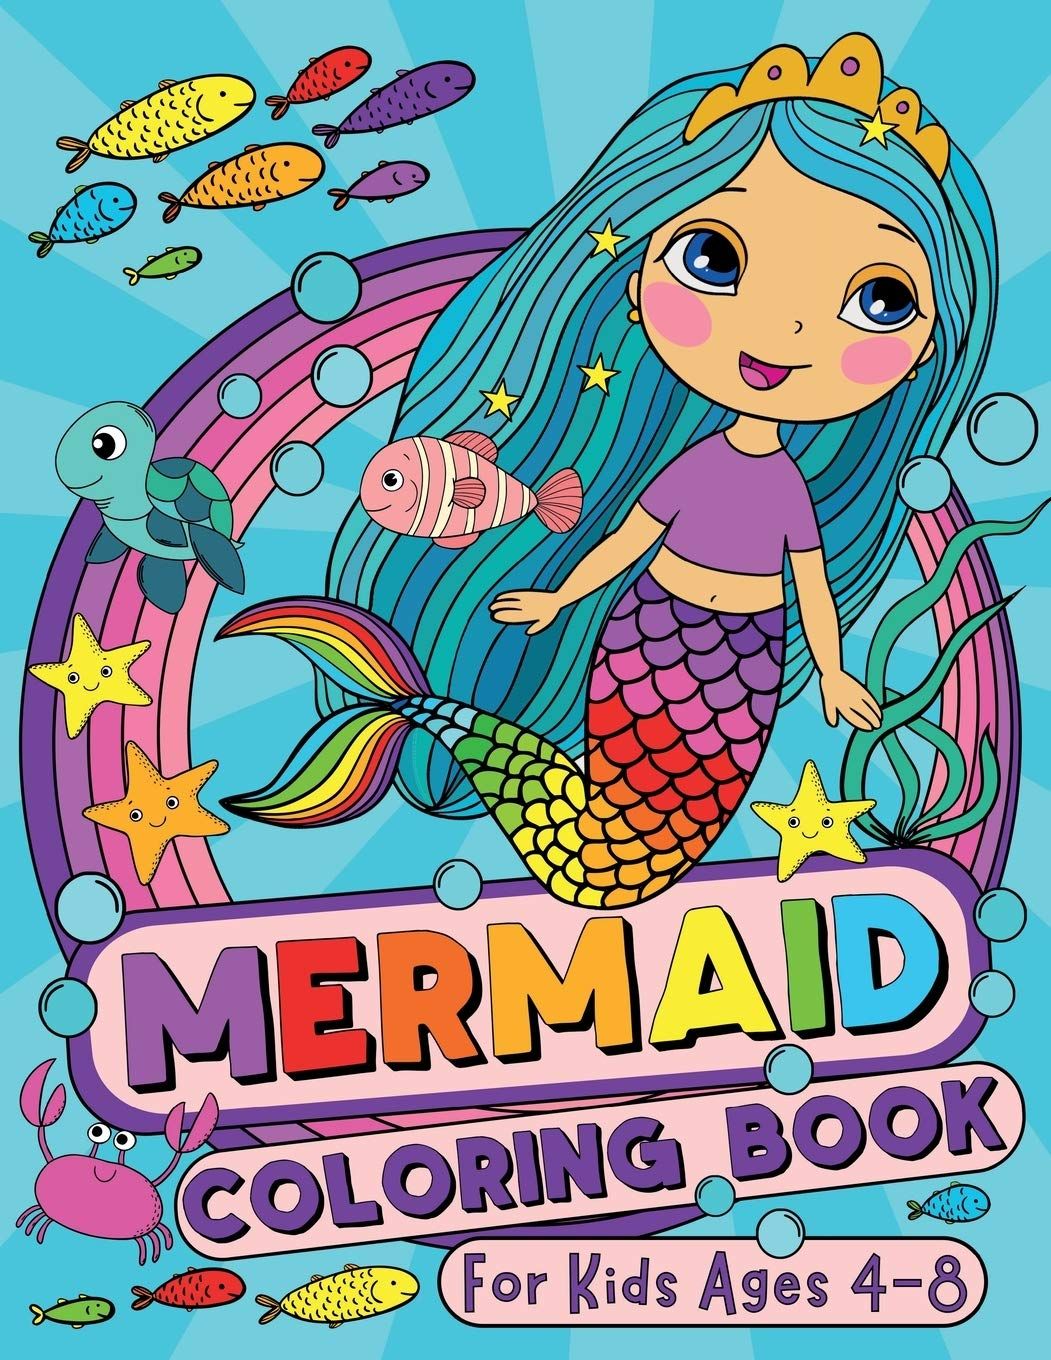 Mermaid Coloring Book by Silly Bear with a colored illustration of a mermaid with aqua hair on the cover